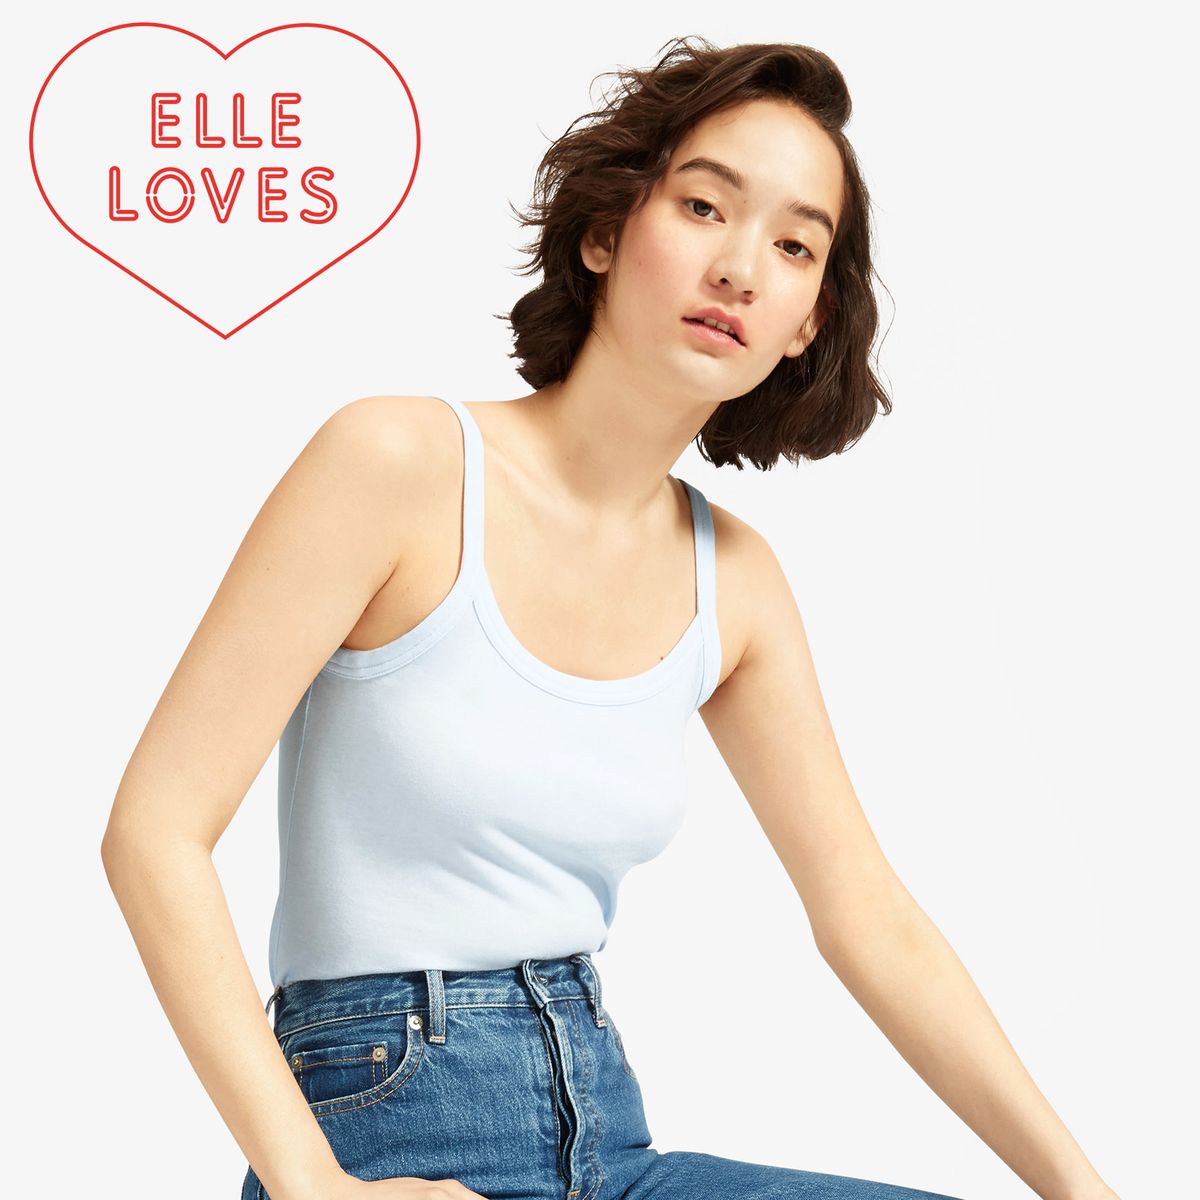 Everlane Is Bringing Back the Spaghetti Strap Top